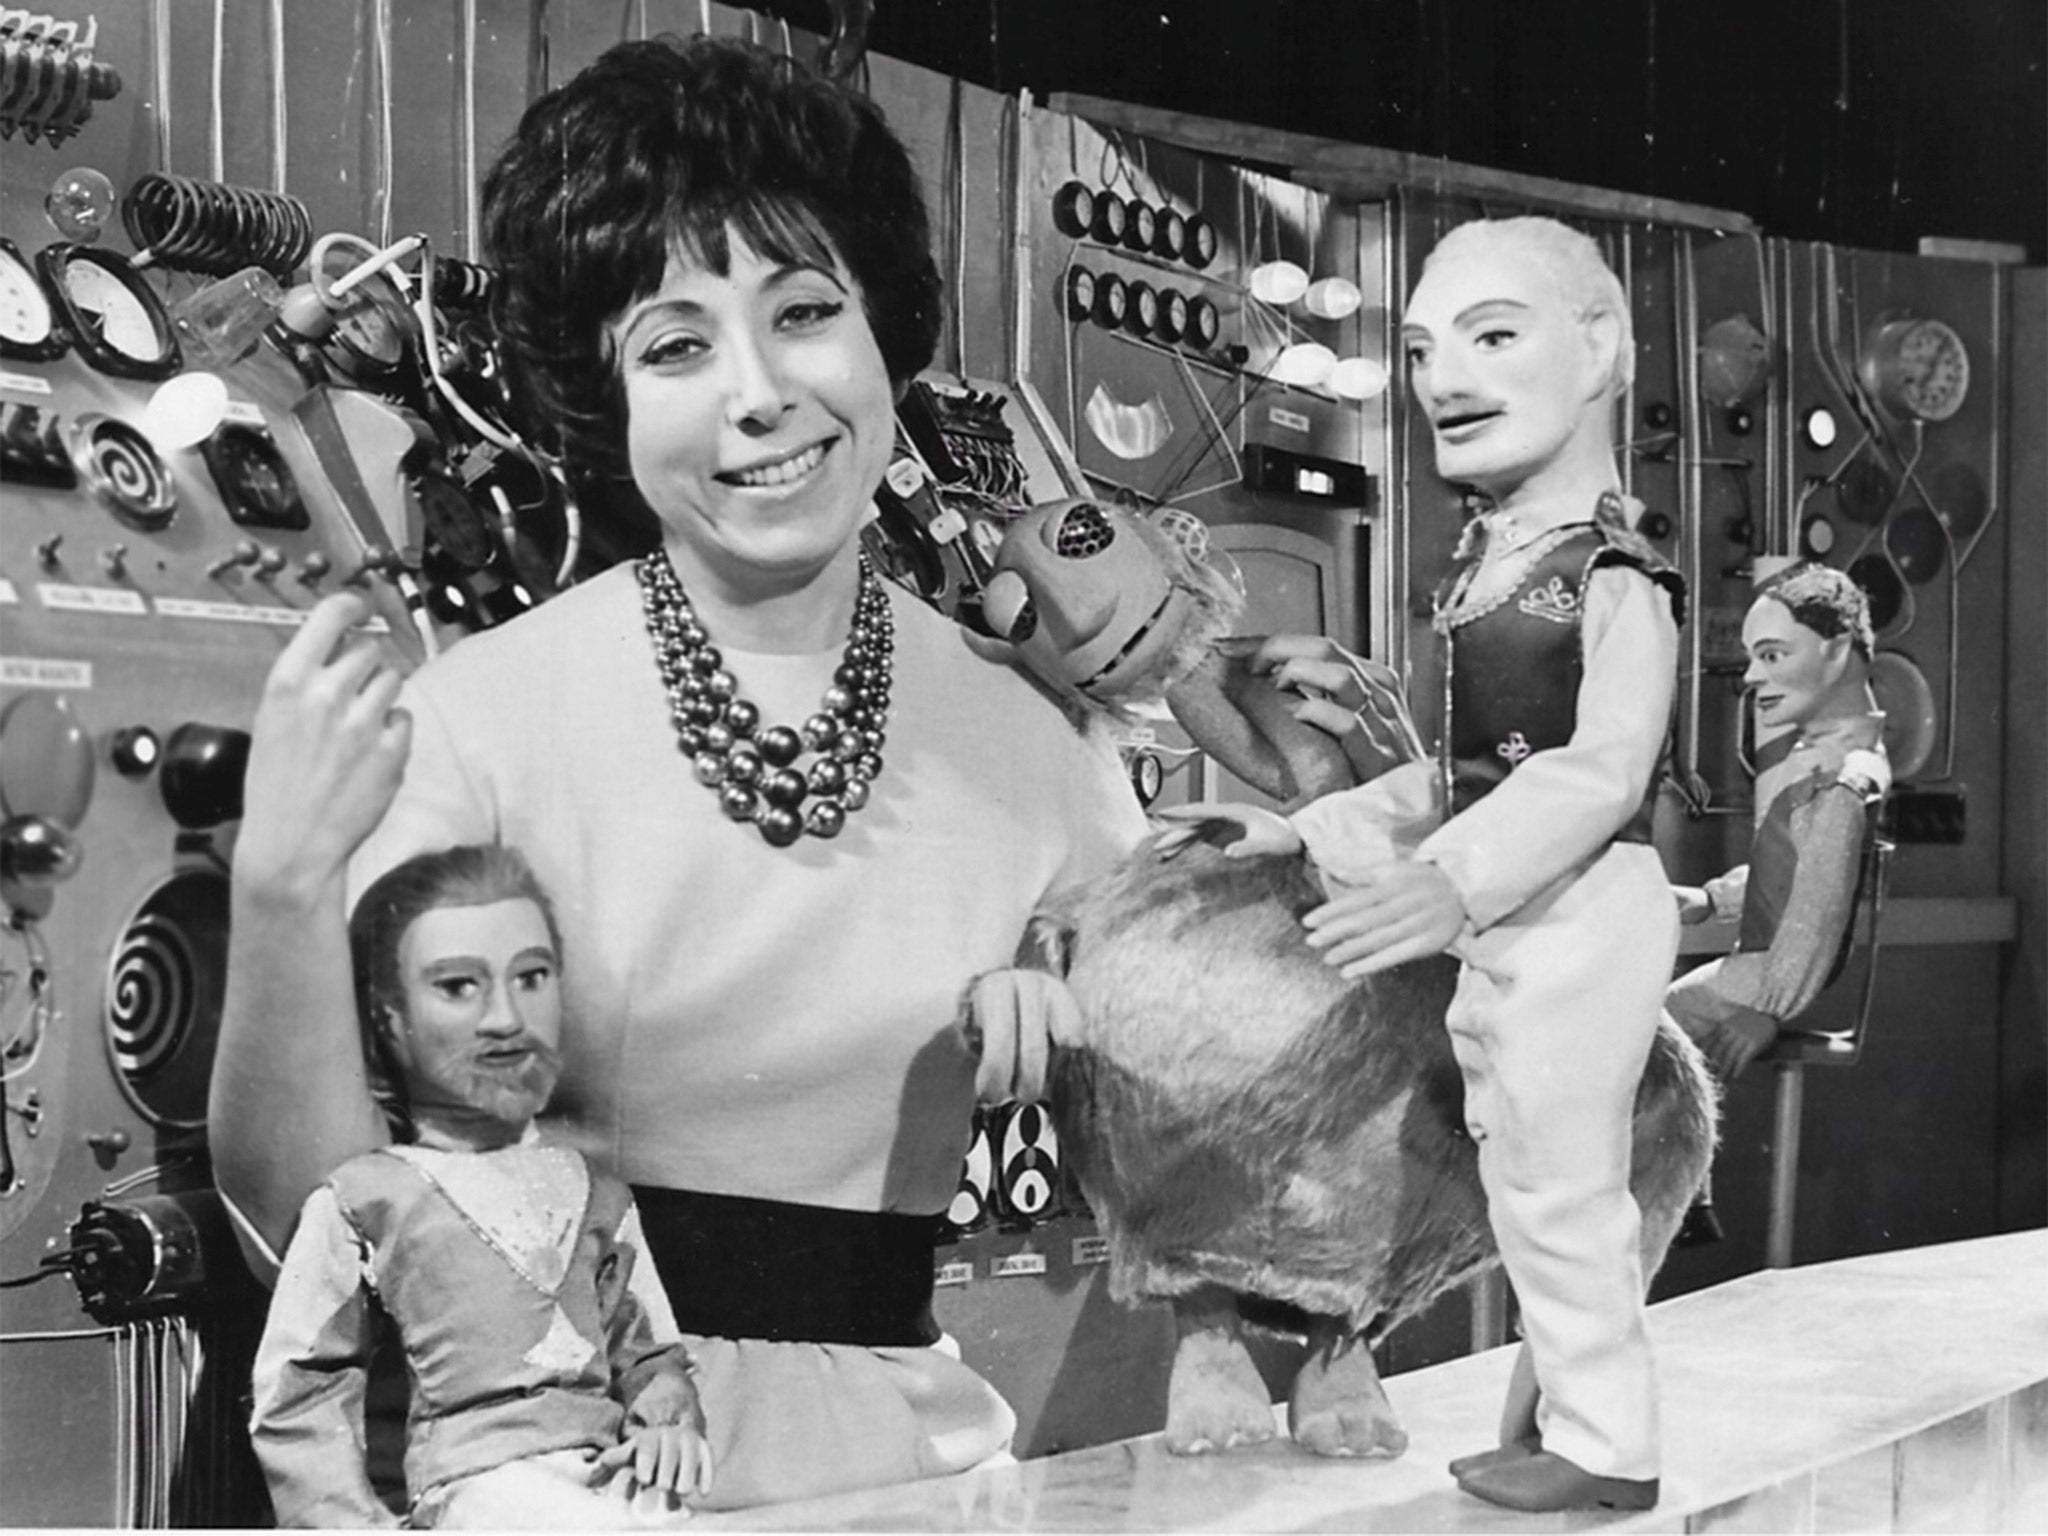 Landmark series: Leigh with characters from ‘Space Patrol’ (1963-64)